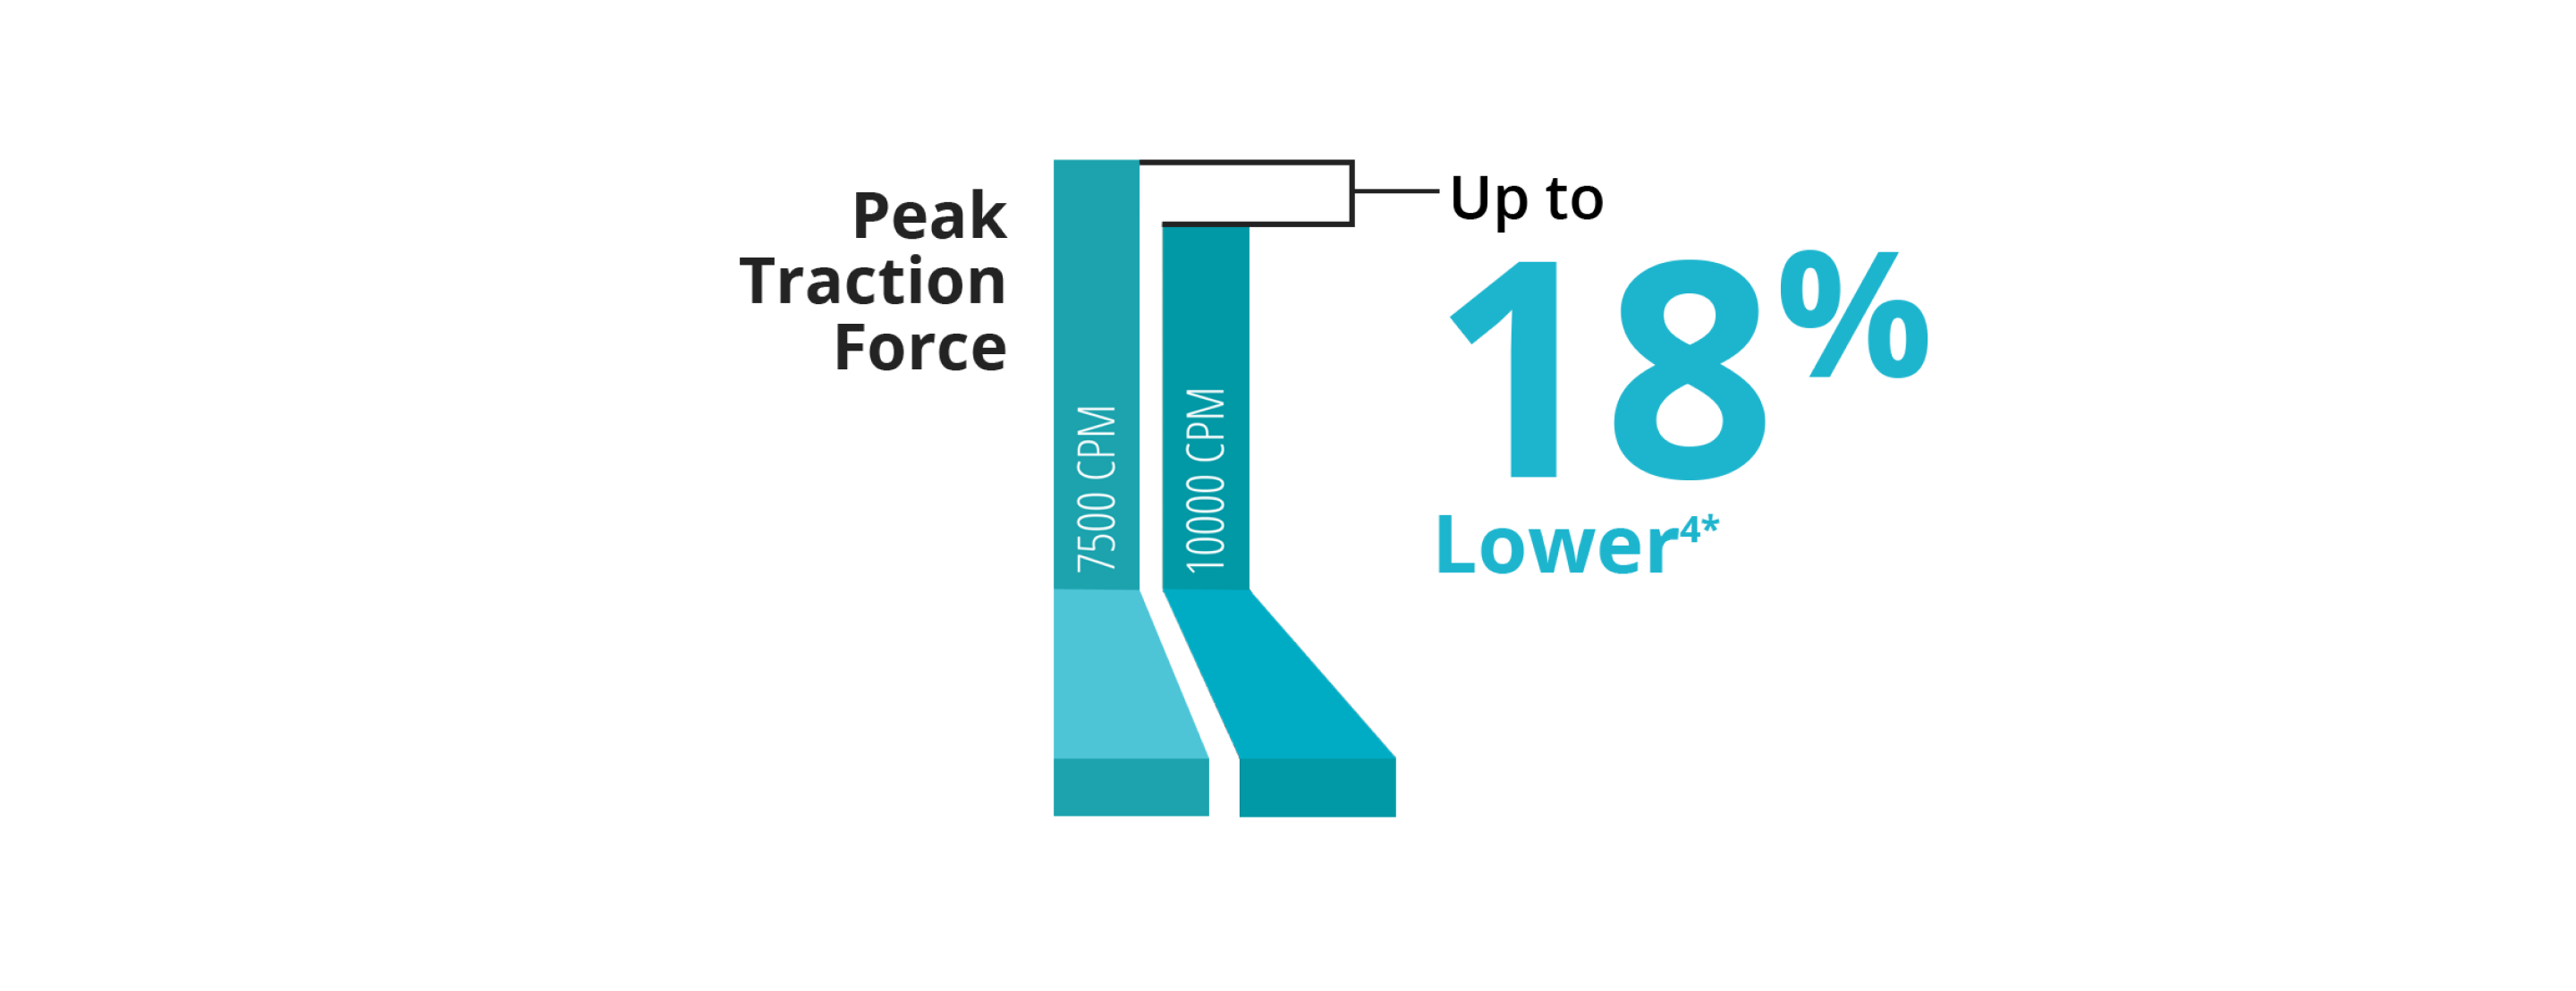 A bar graph comparing the peak traction force between the 7.5K and 10K 25+ Gauge Advanced ULTRAVIT probe. The 10K probe has 18% lower pulsatile traction.